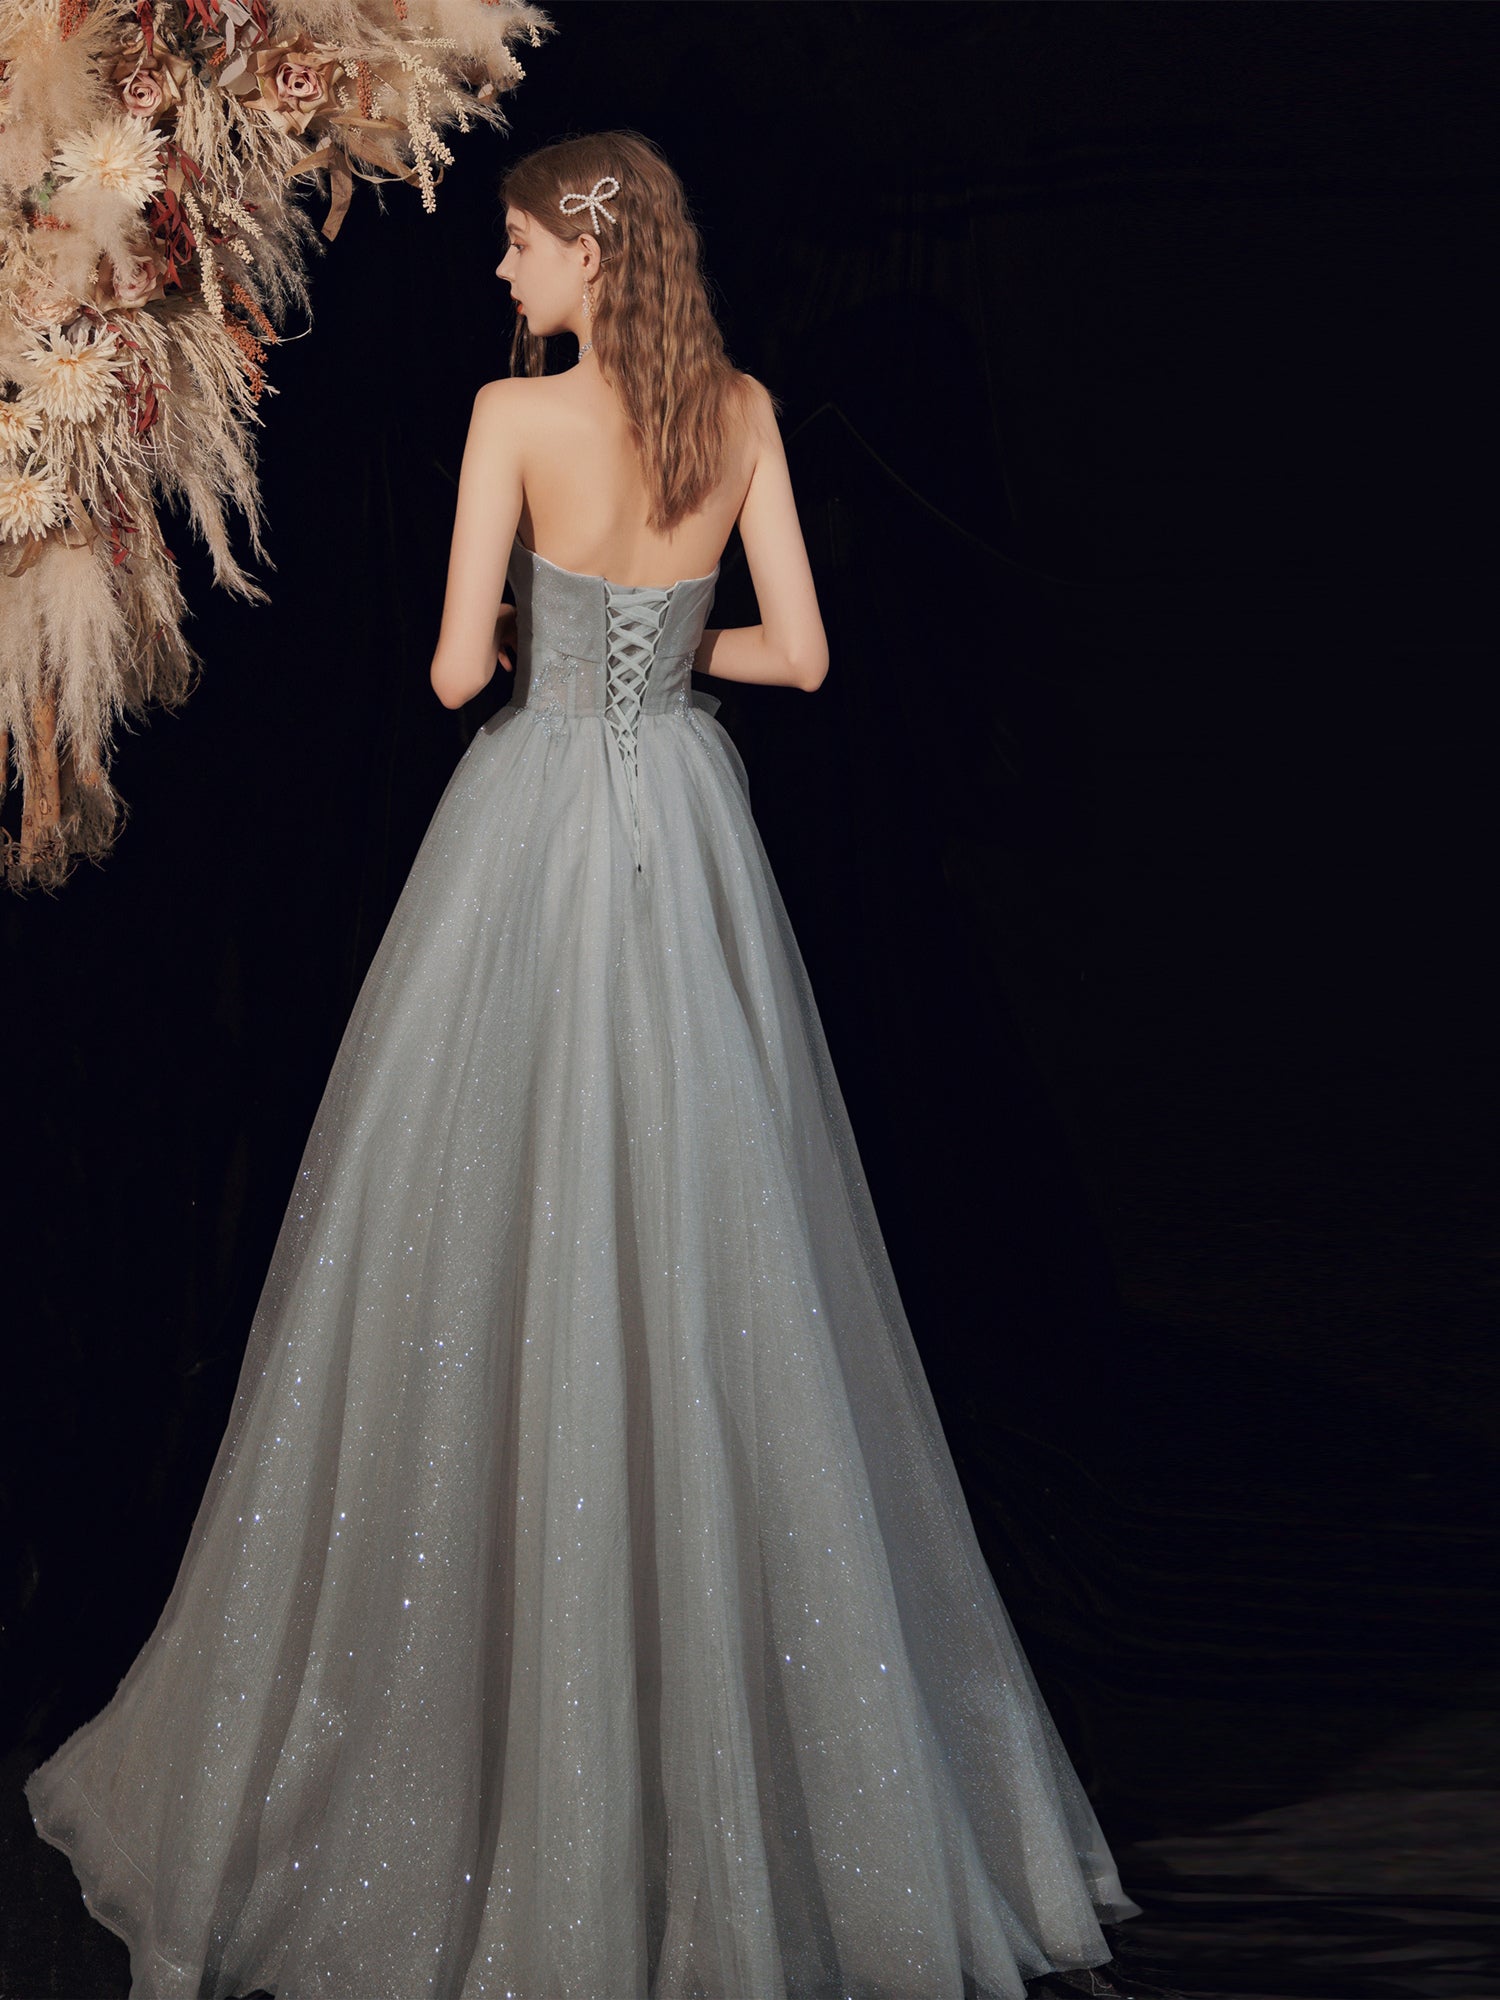 Glitter Strapless Gray Long Prom Dress - DollyGown